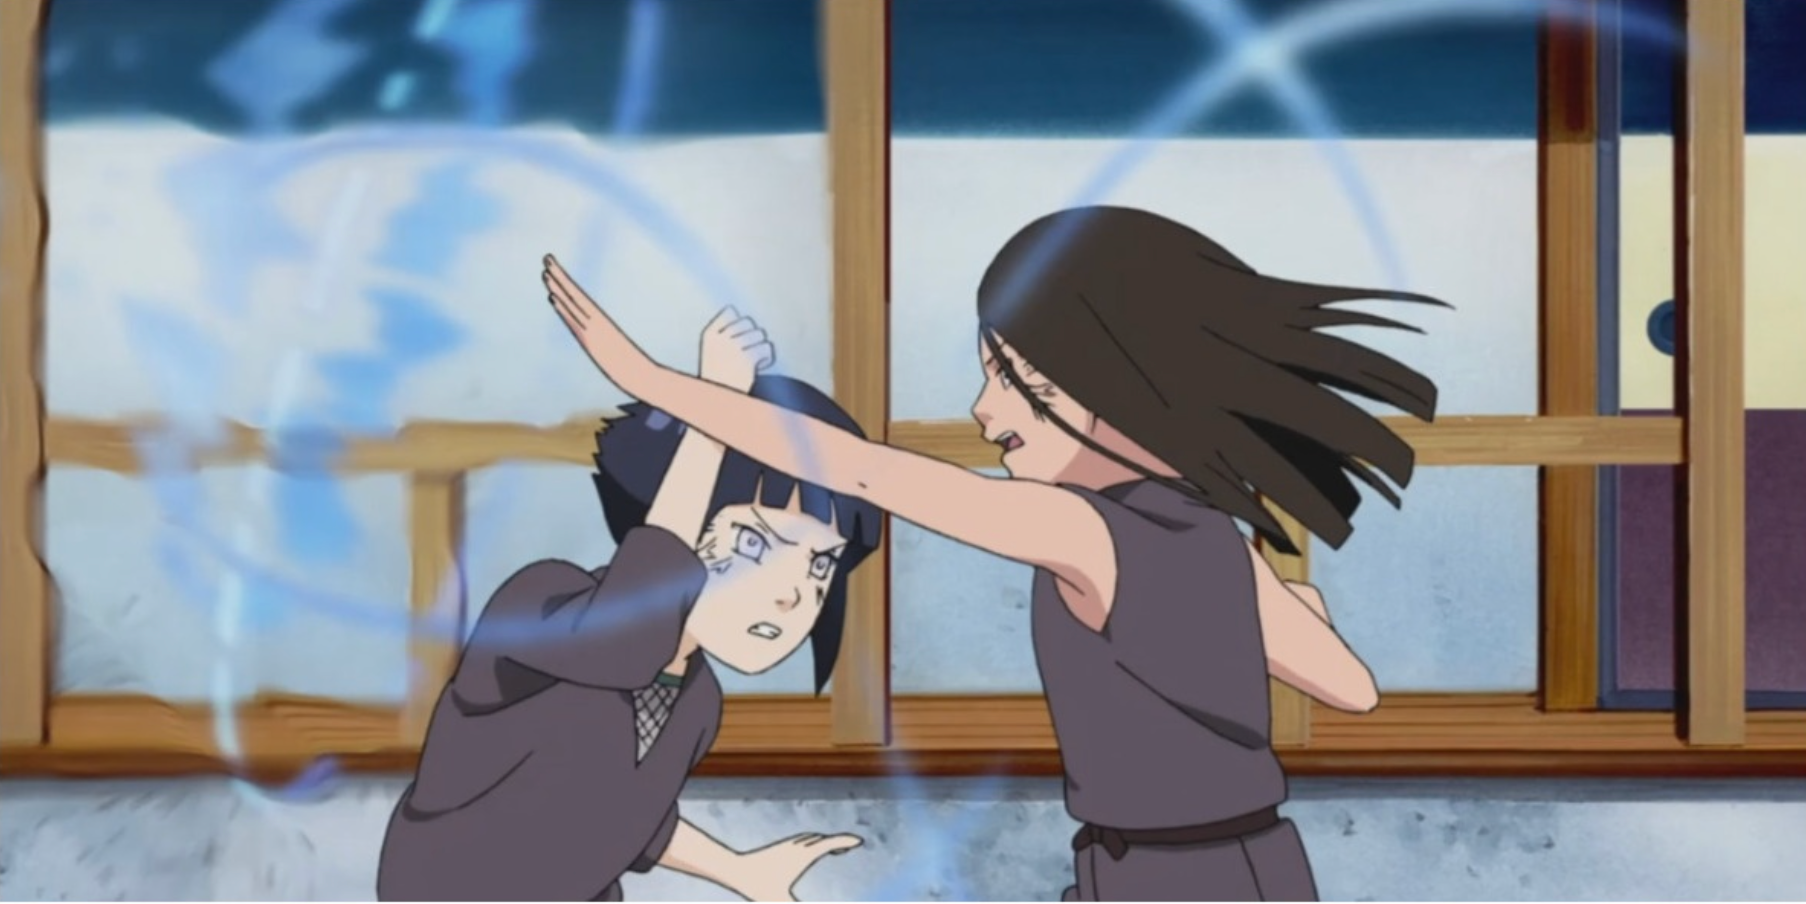 Stayed The Same: She Remained A Taijutsu Specialist